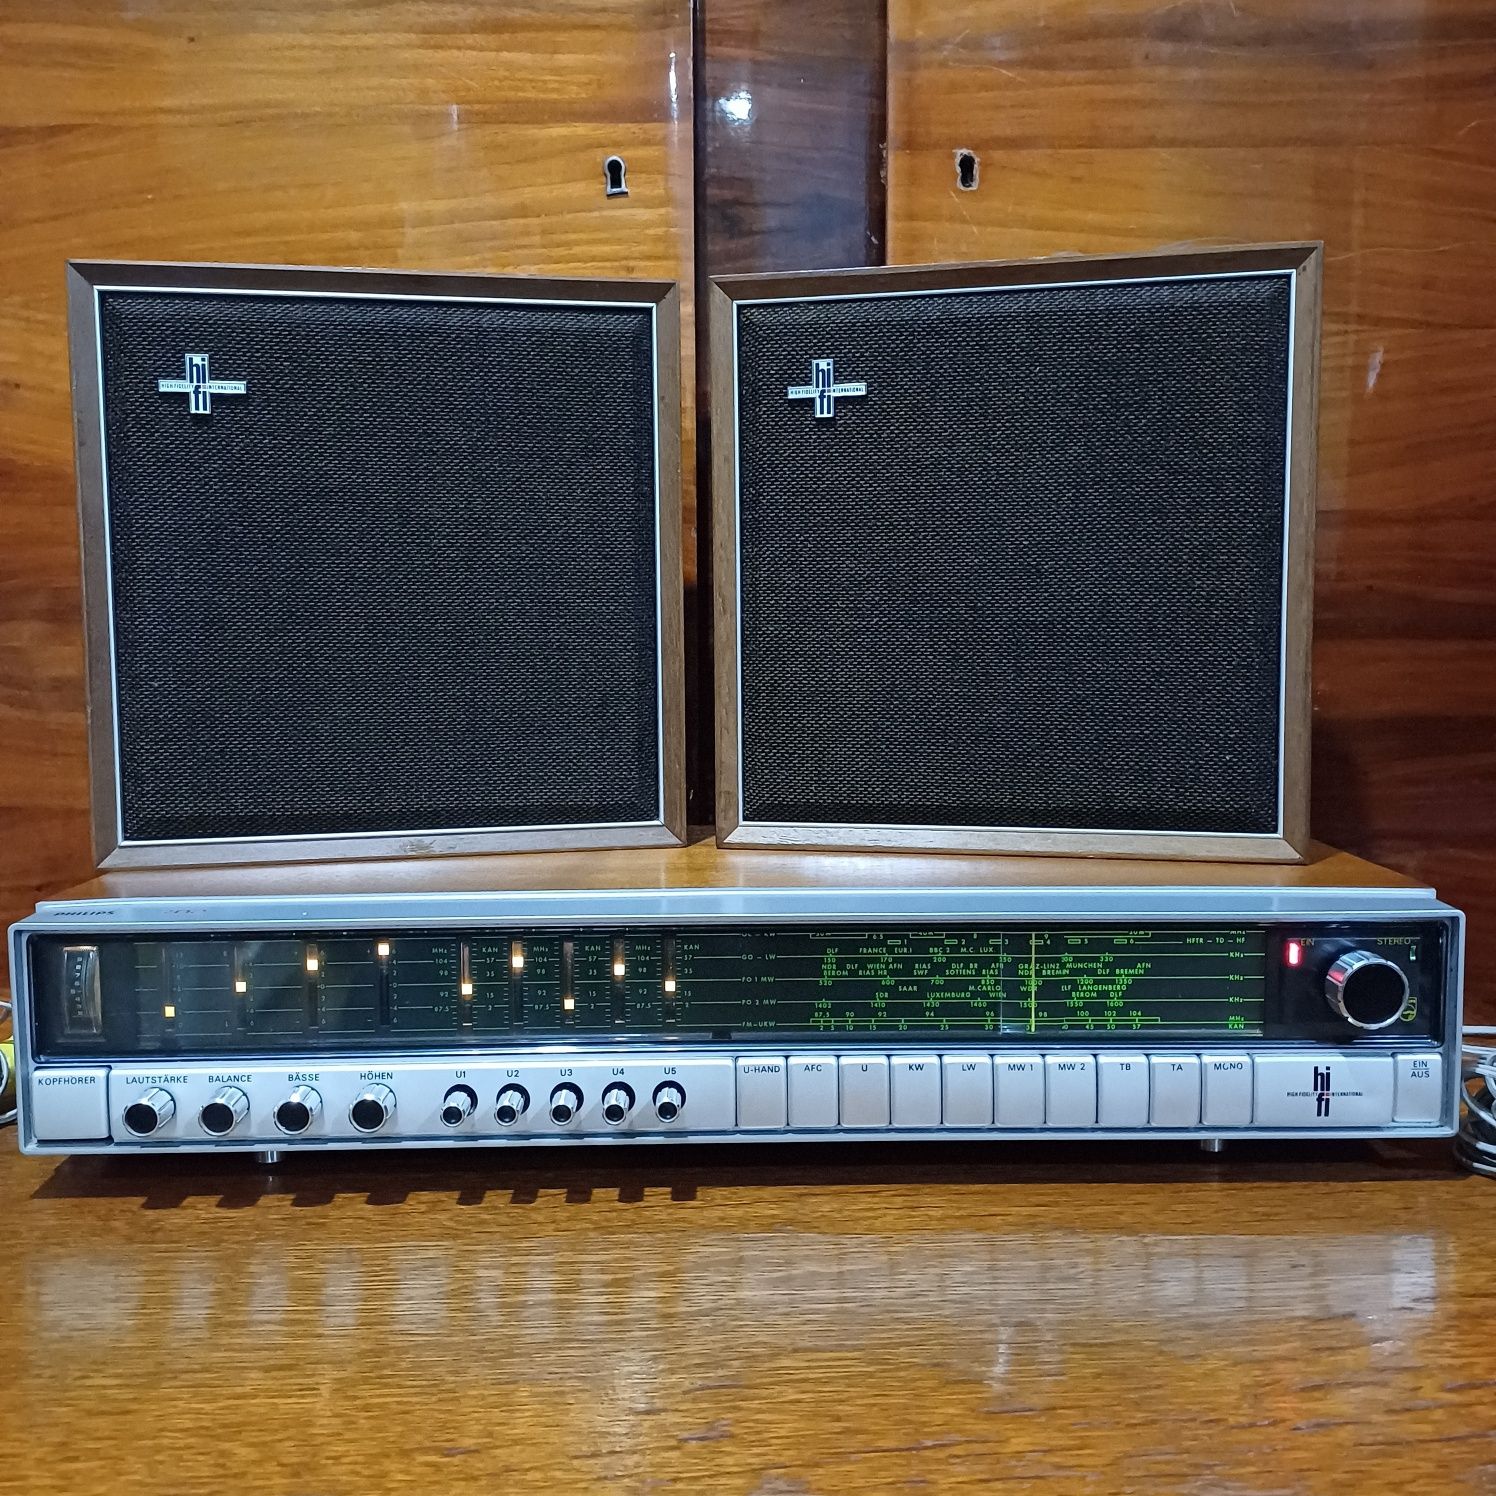 Receiver Philips